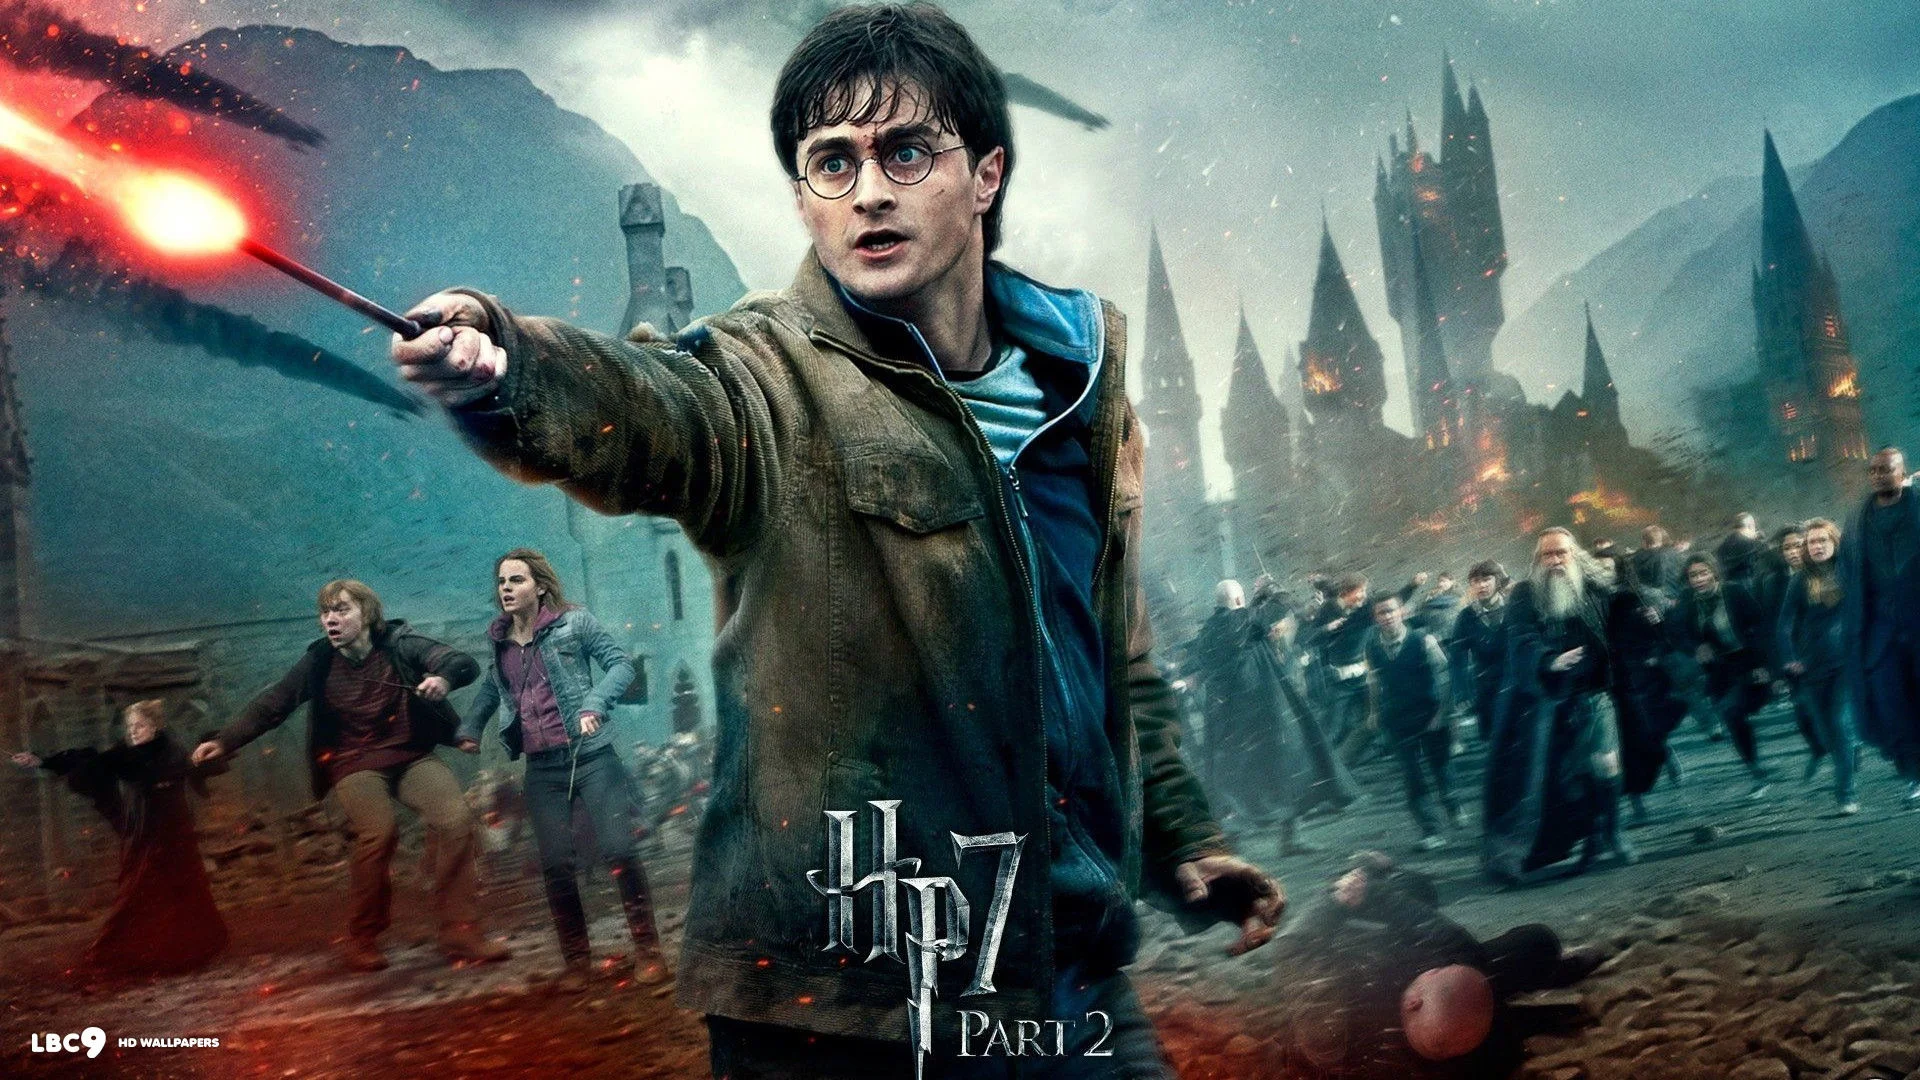 Harry potter and the deathly hallows part 2 wide 1080×1920